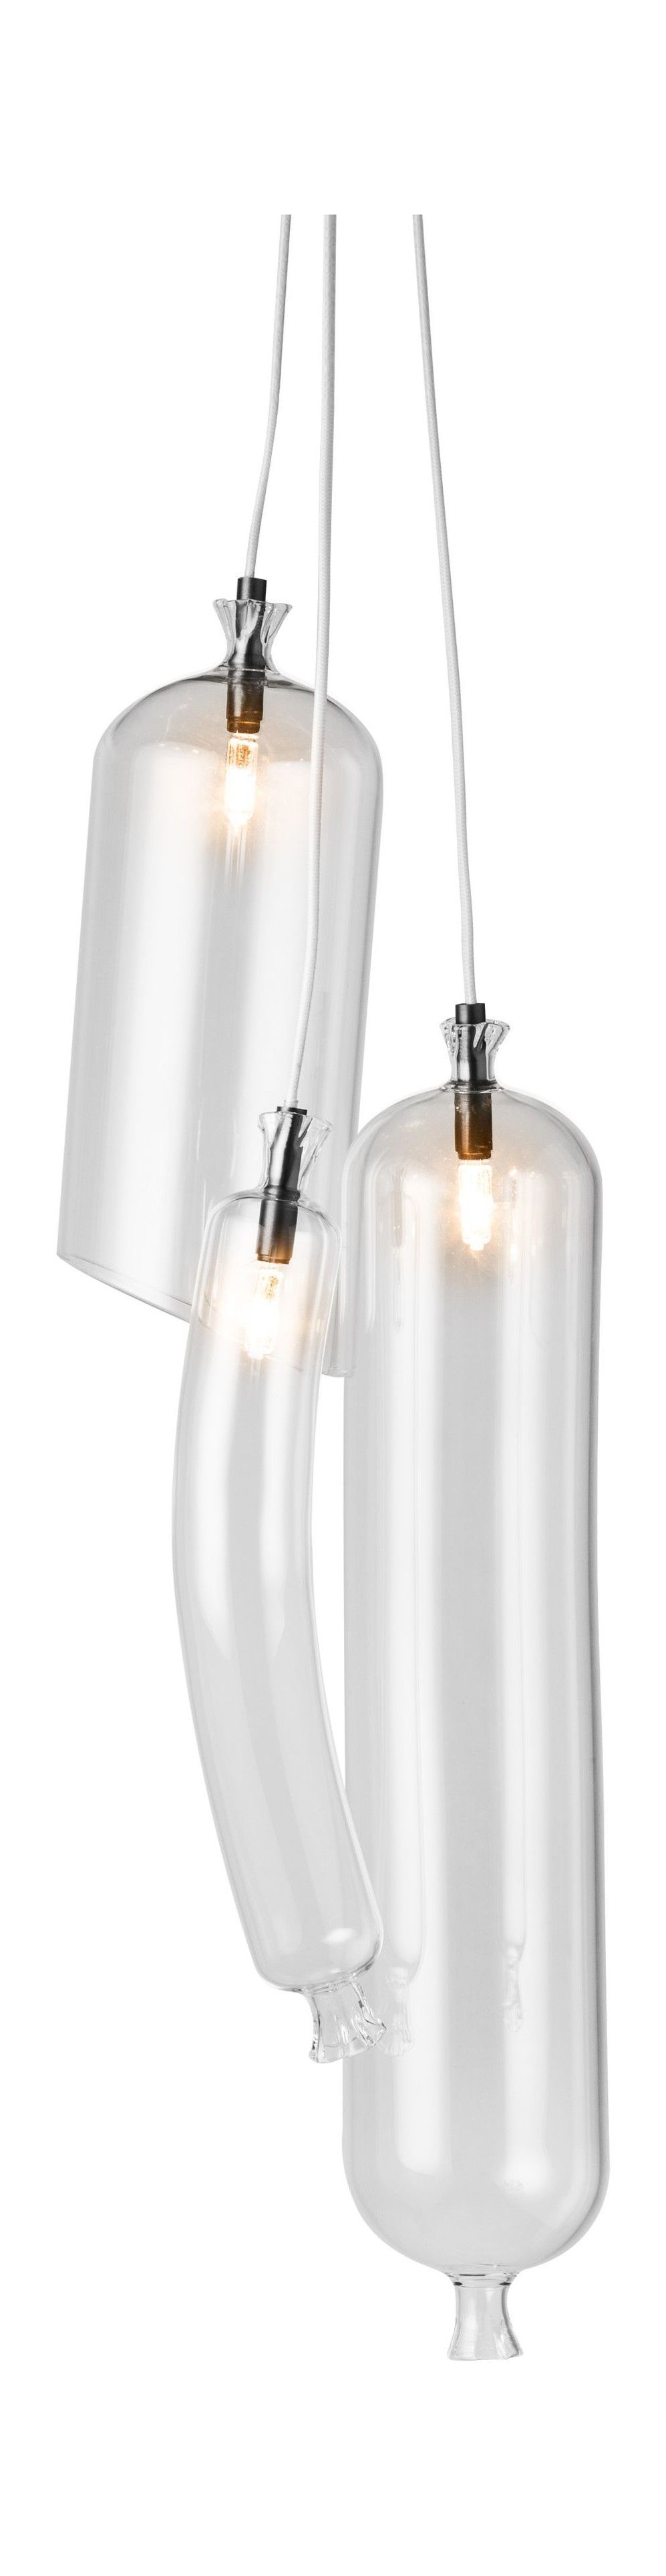 Pendant Lamp So-Sage Set of 3 by Petite Friture